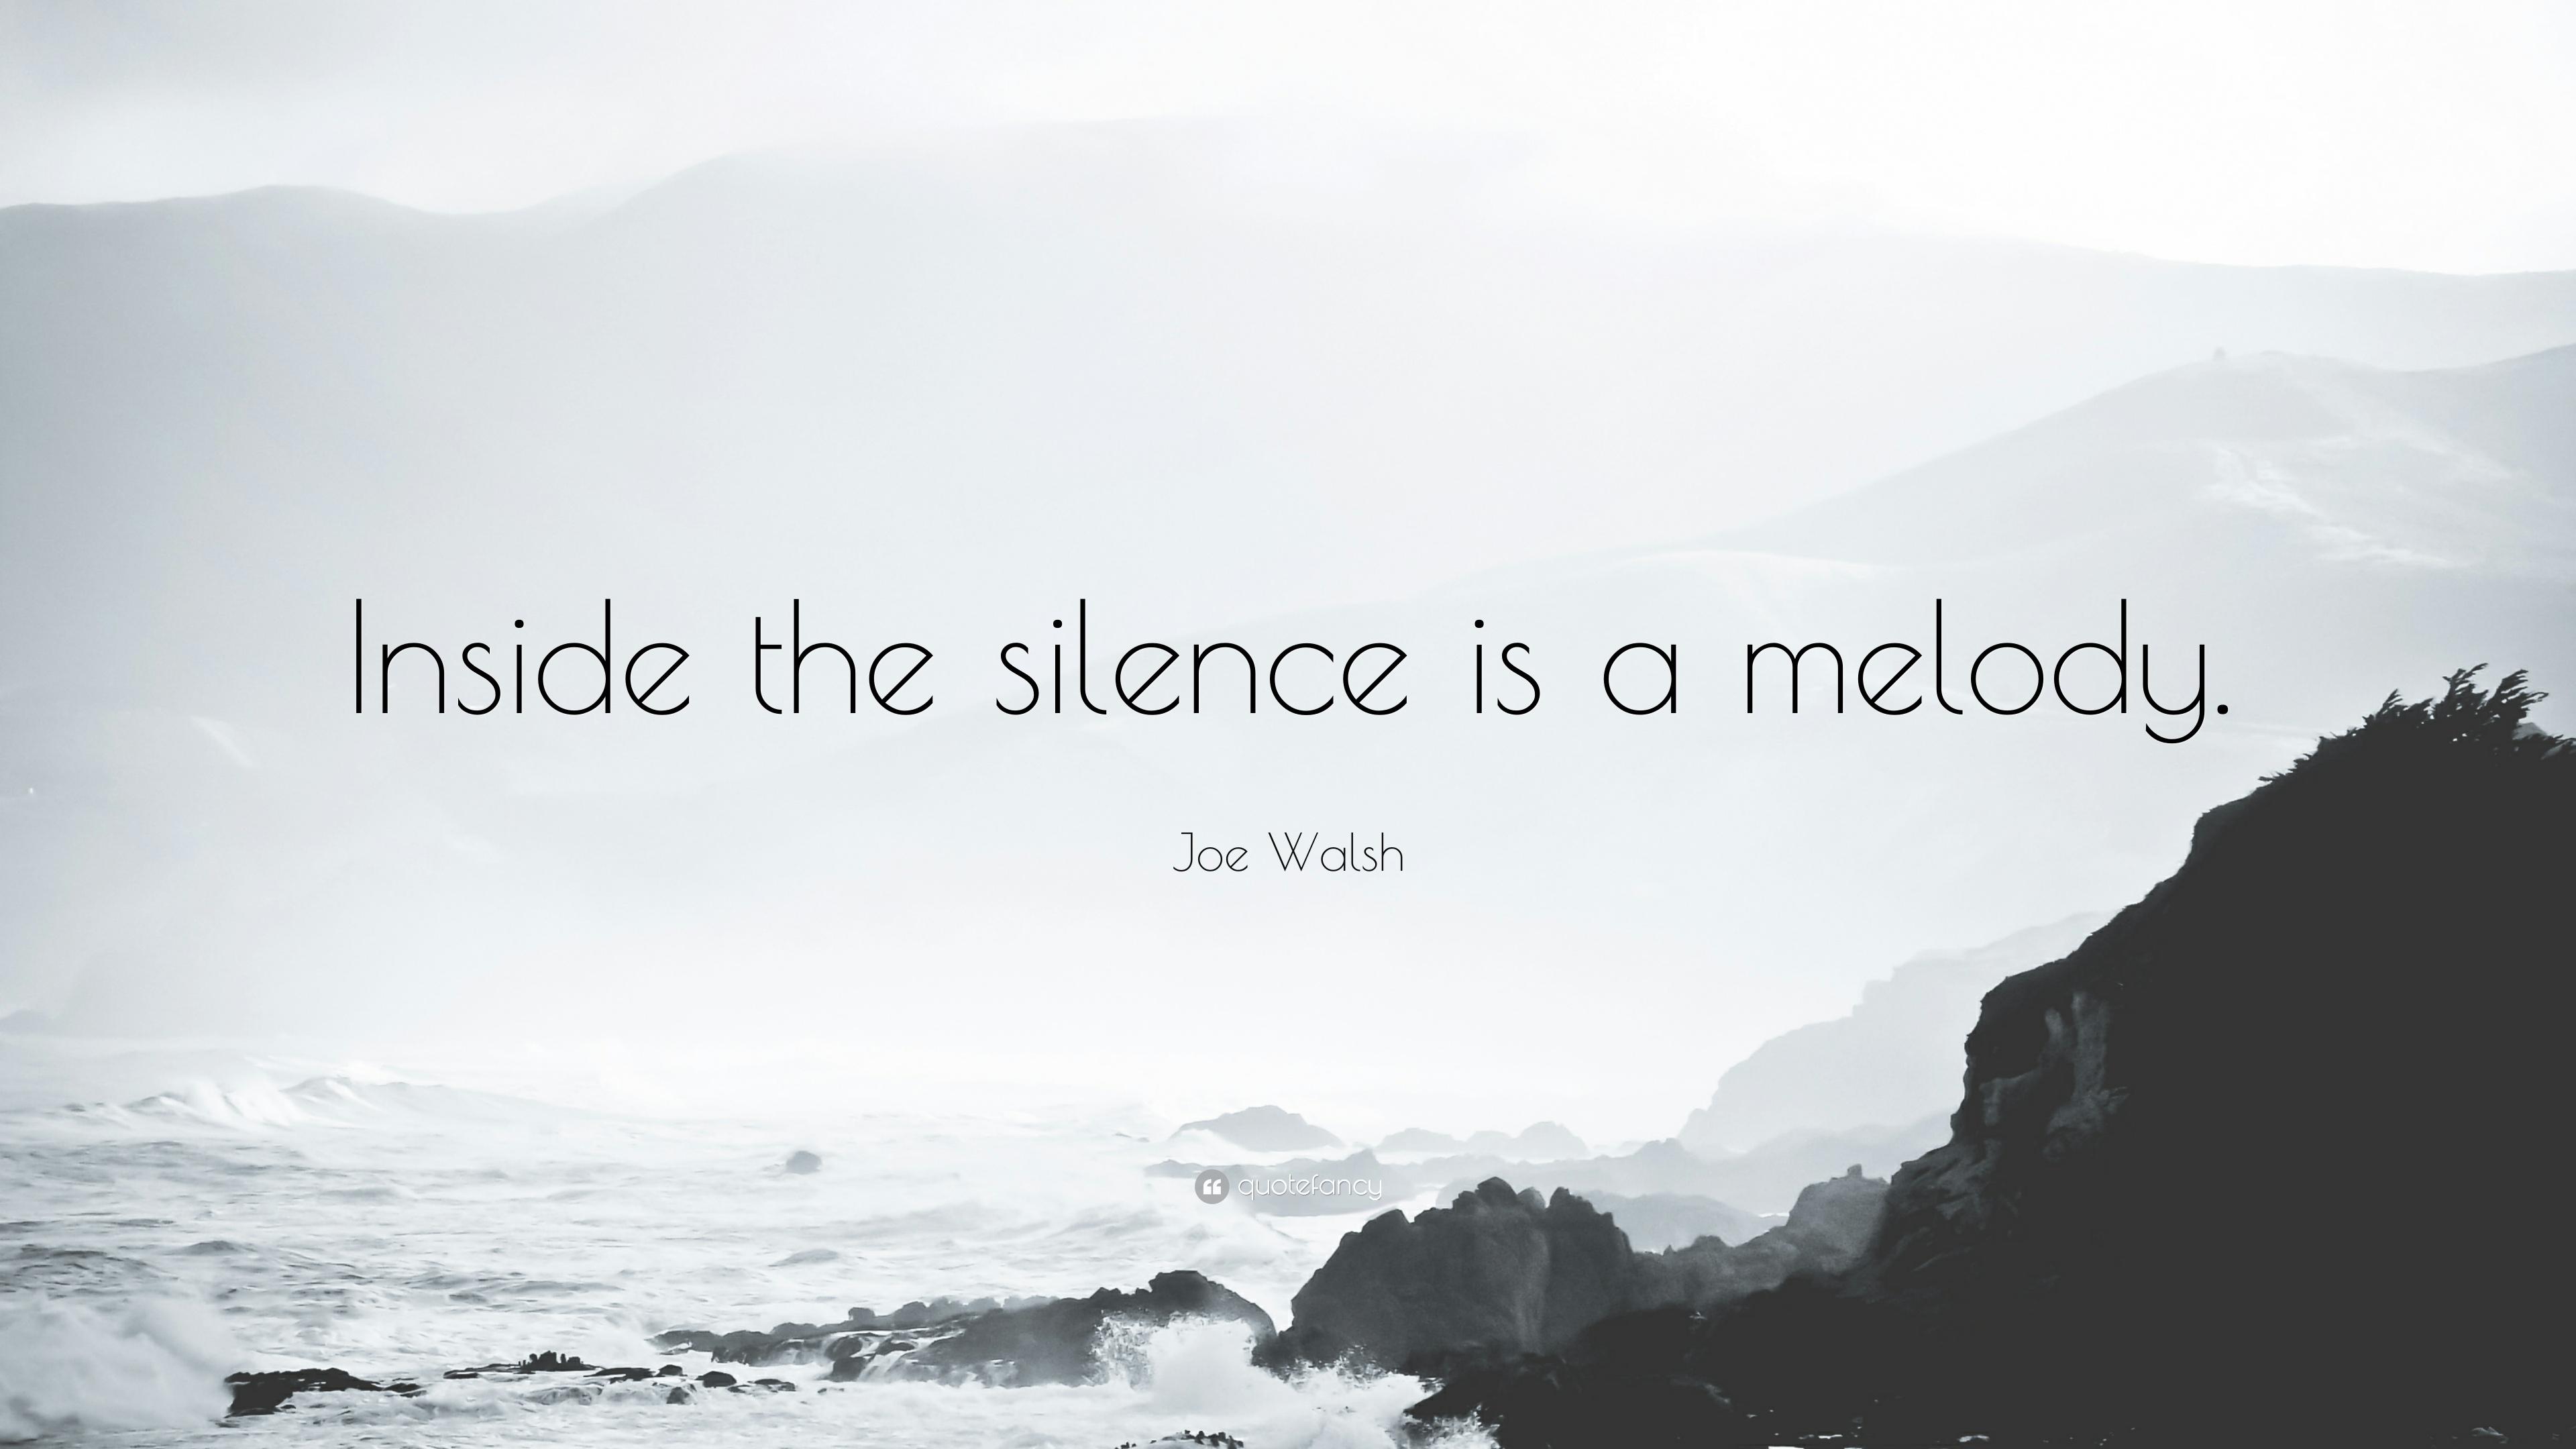 Joe Walsh Quote: “Inside the silence is a melody.” 7 wallpaper